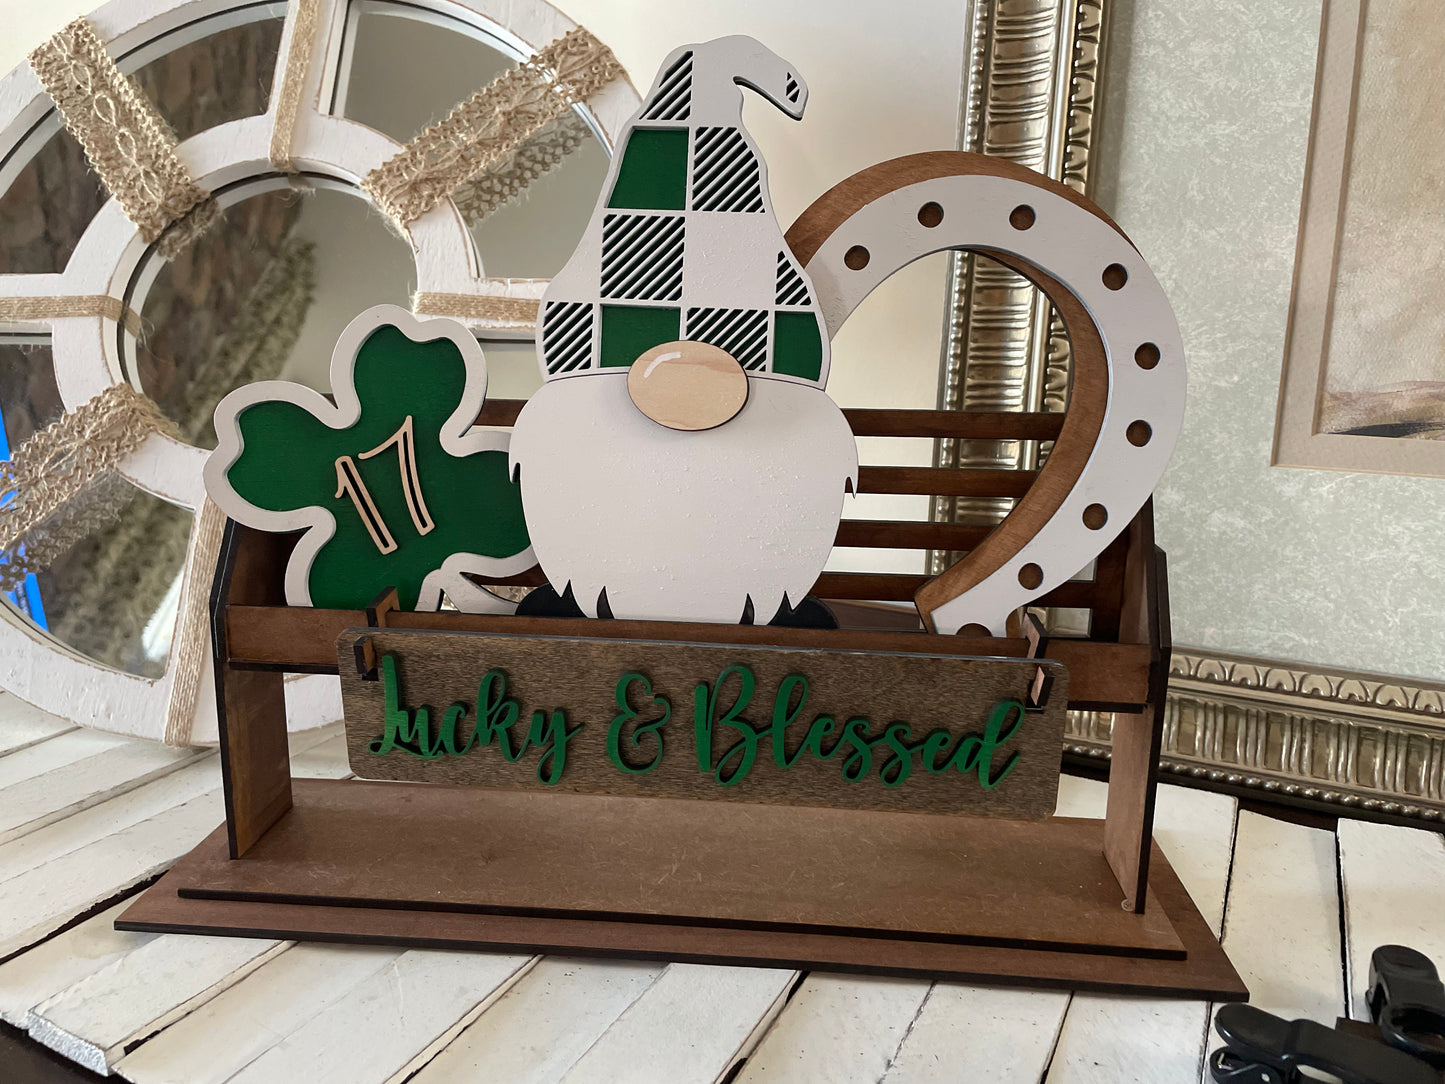 March 5 - Sip Shop & Craft - St Pat's & Easter